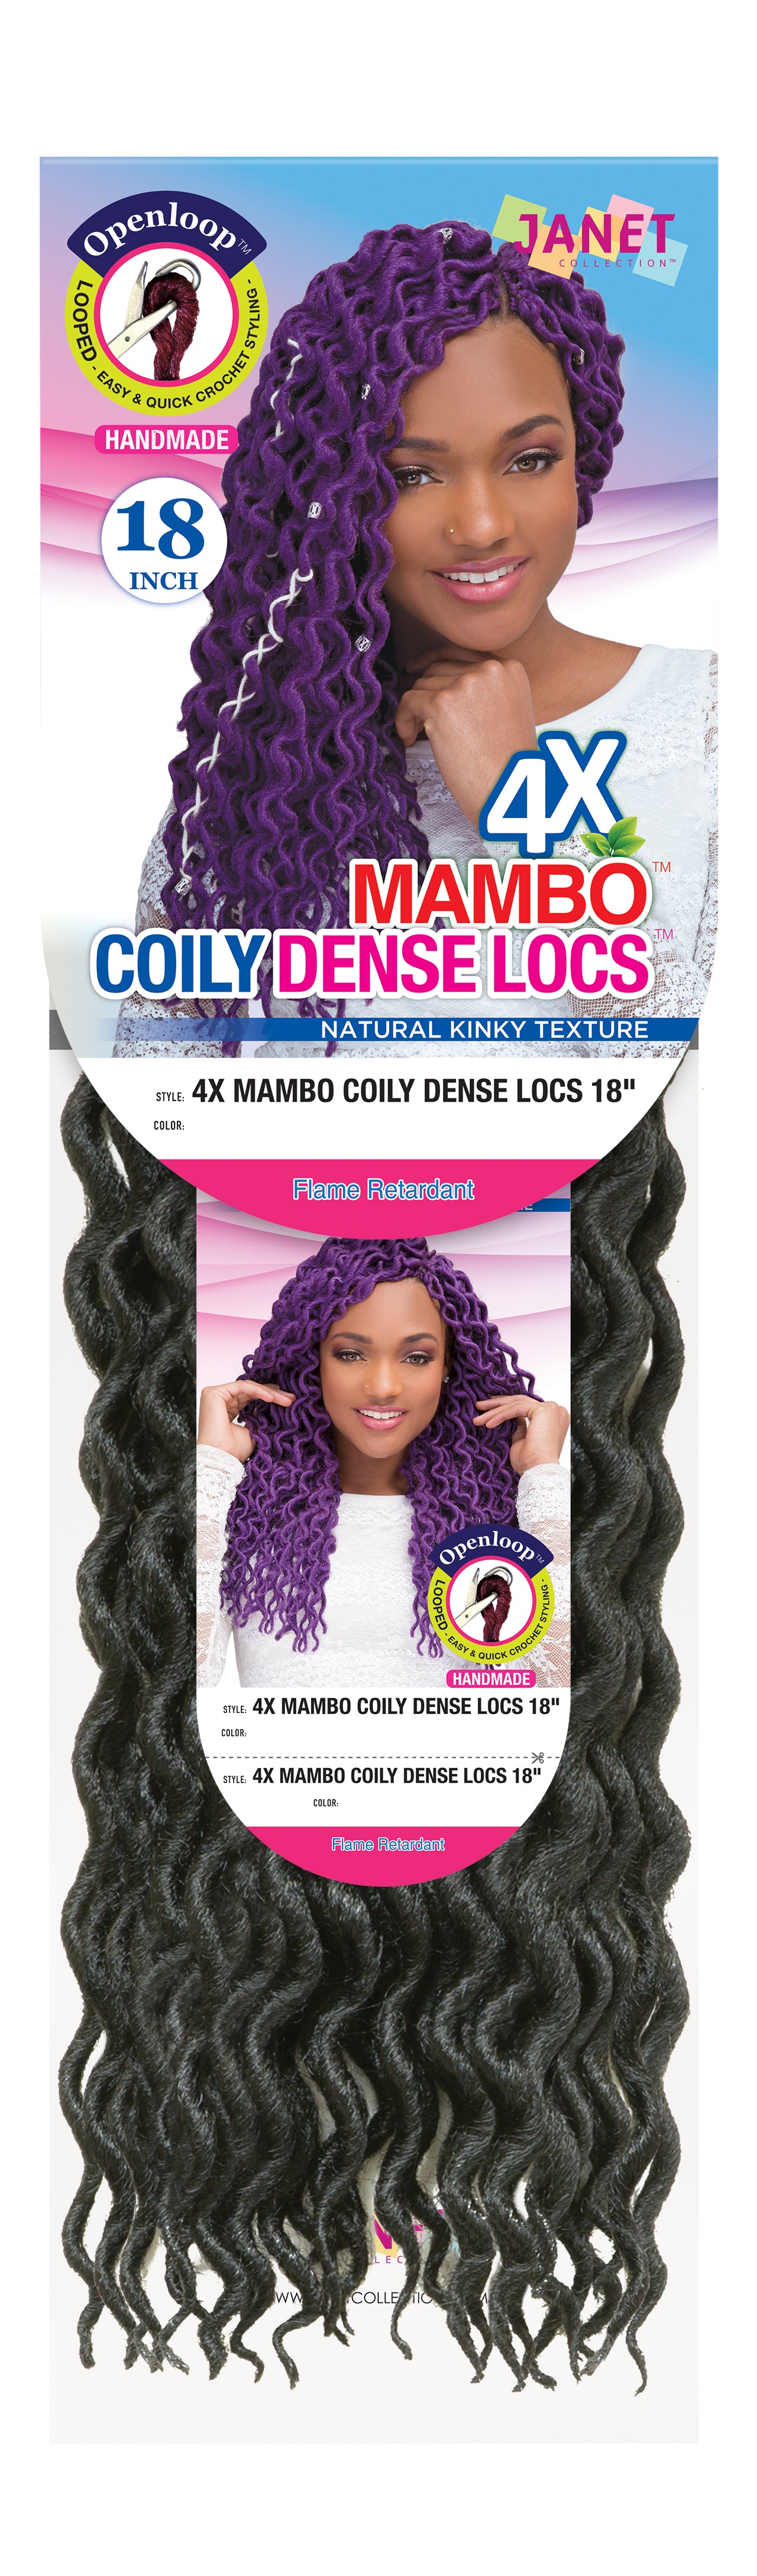 JANET COLLECTION - 2X MAMBO COILYDENSE LOCS 18″